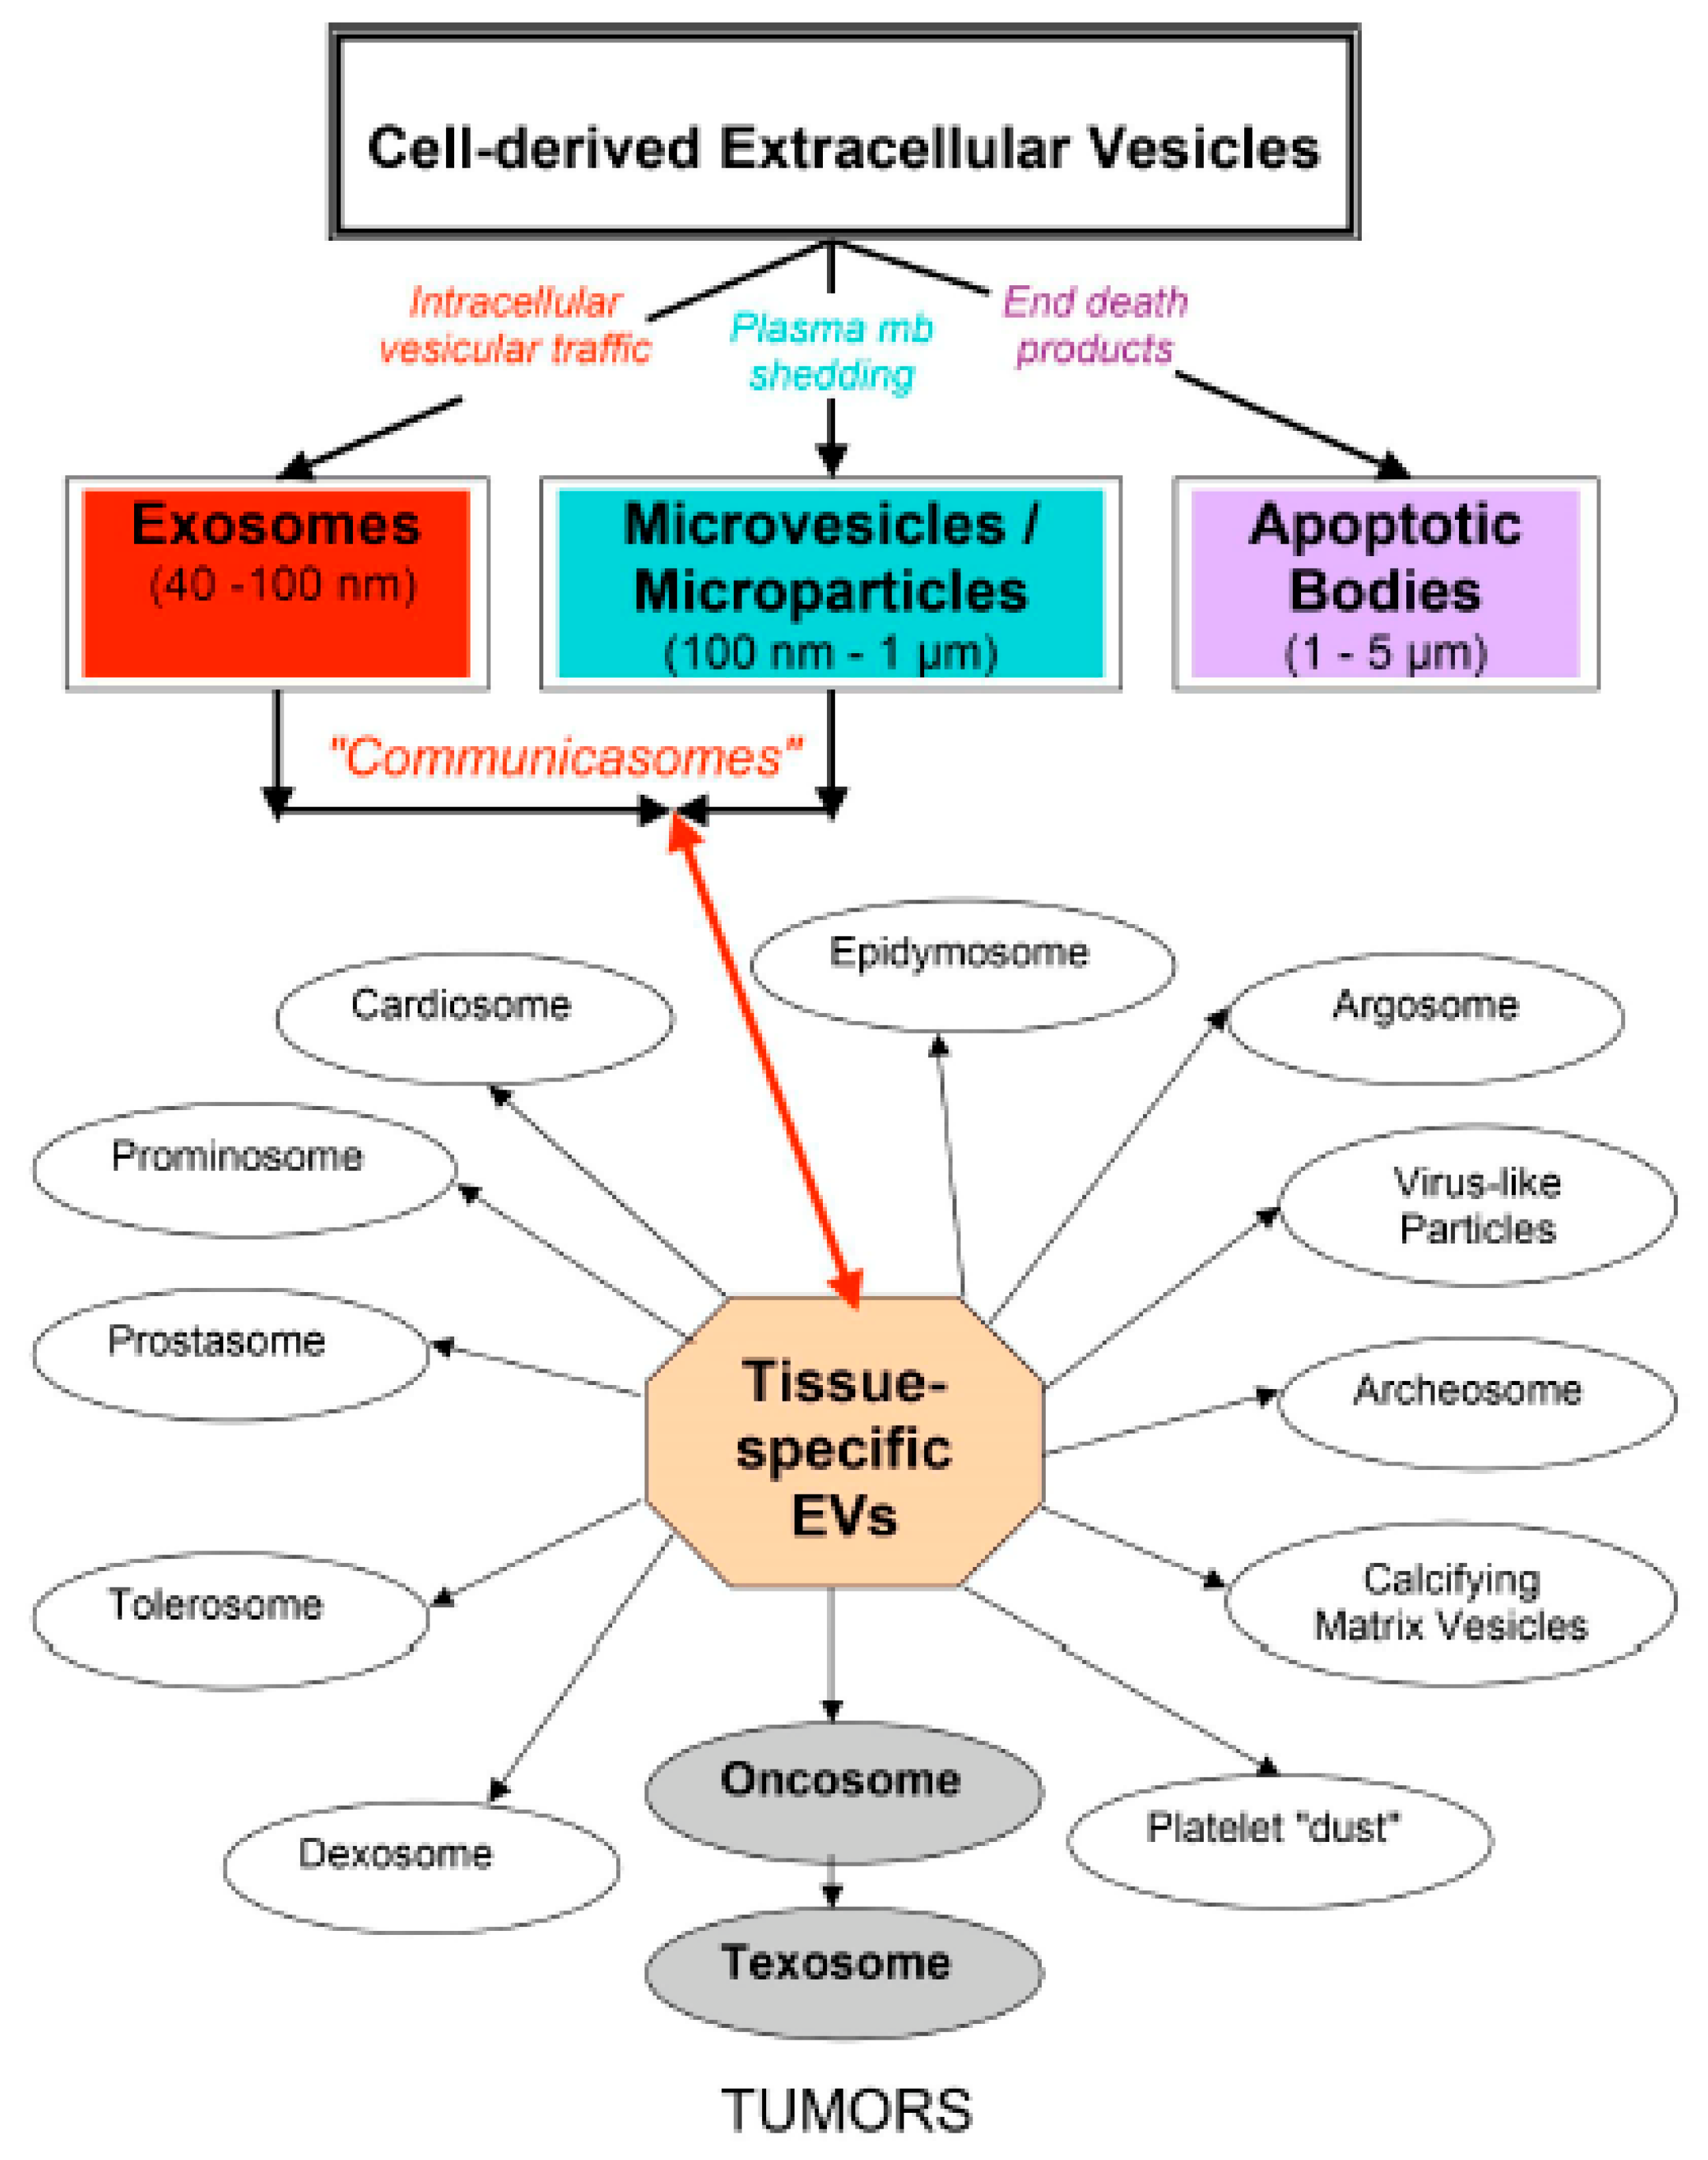 ISEV2018 abstract book - Théry - 2018 - Journal of Extracellular